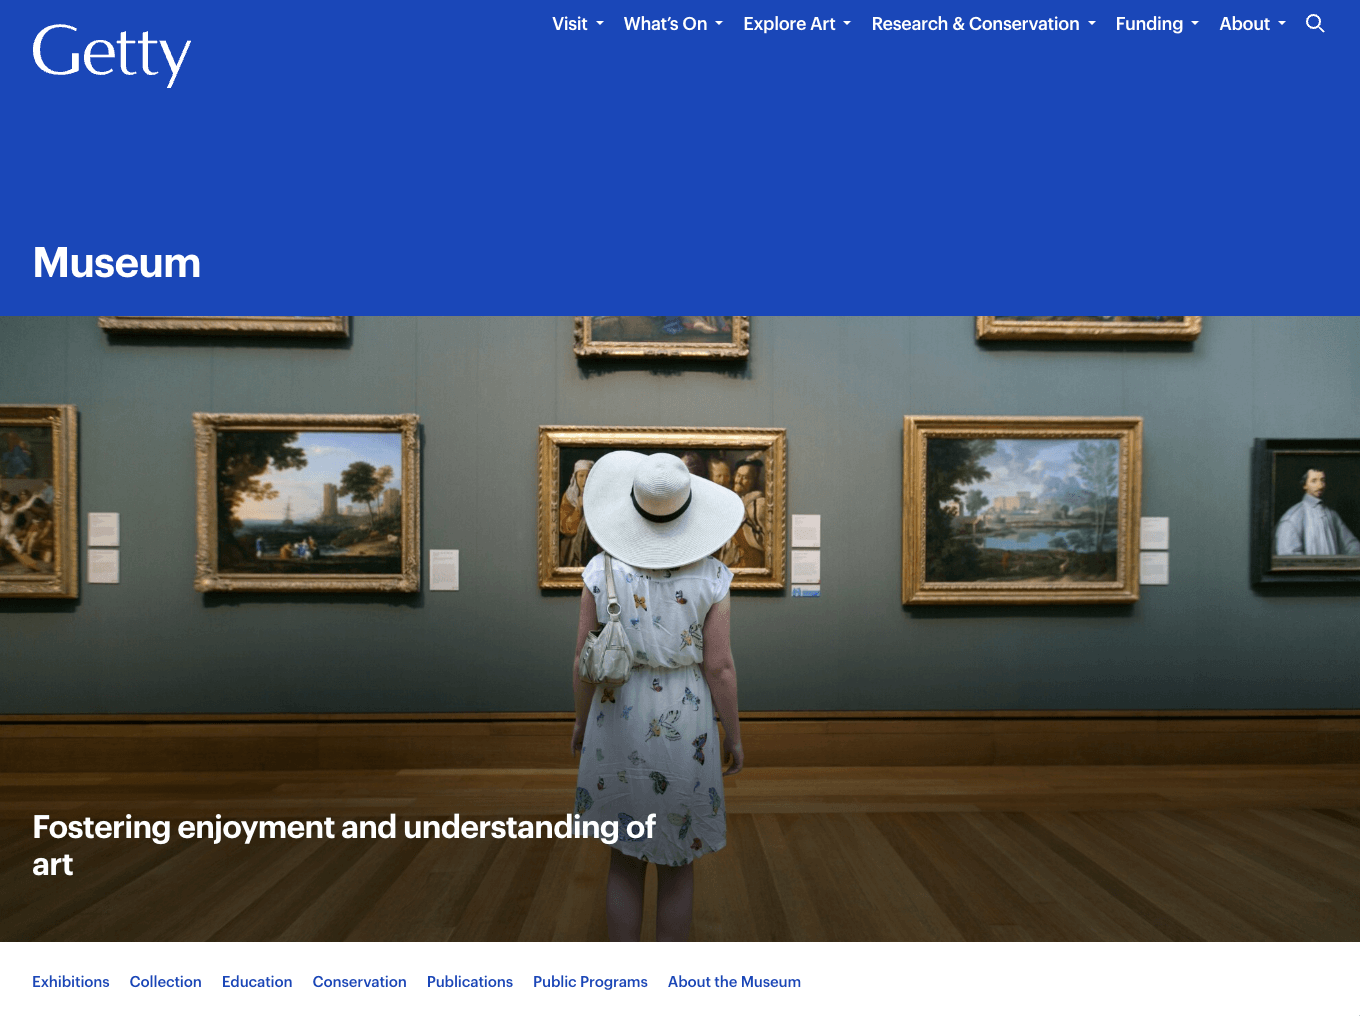 A snapshot of the Getty homepage